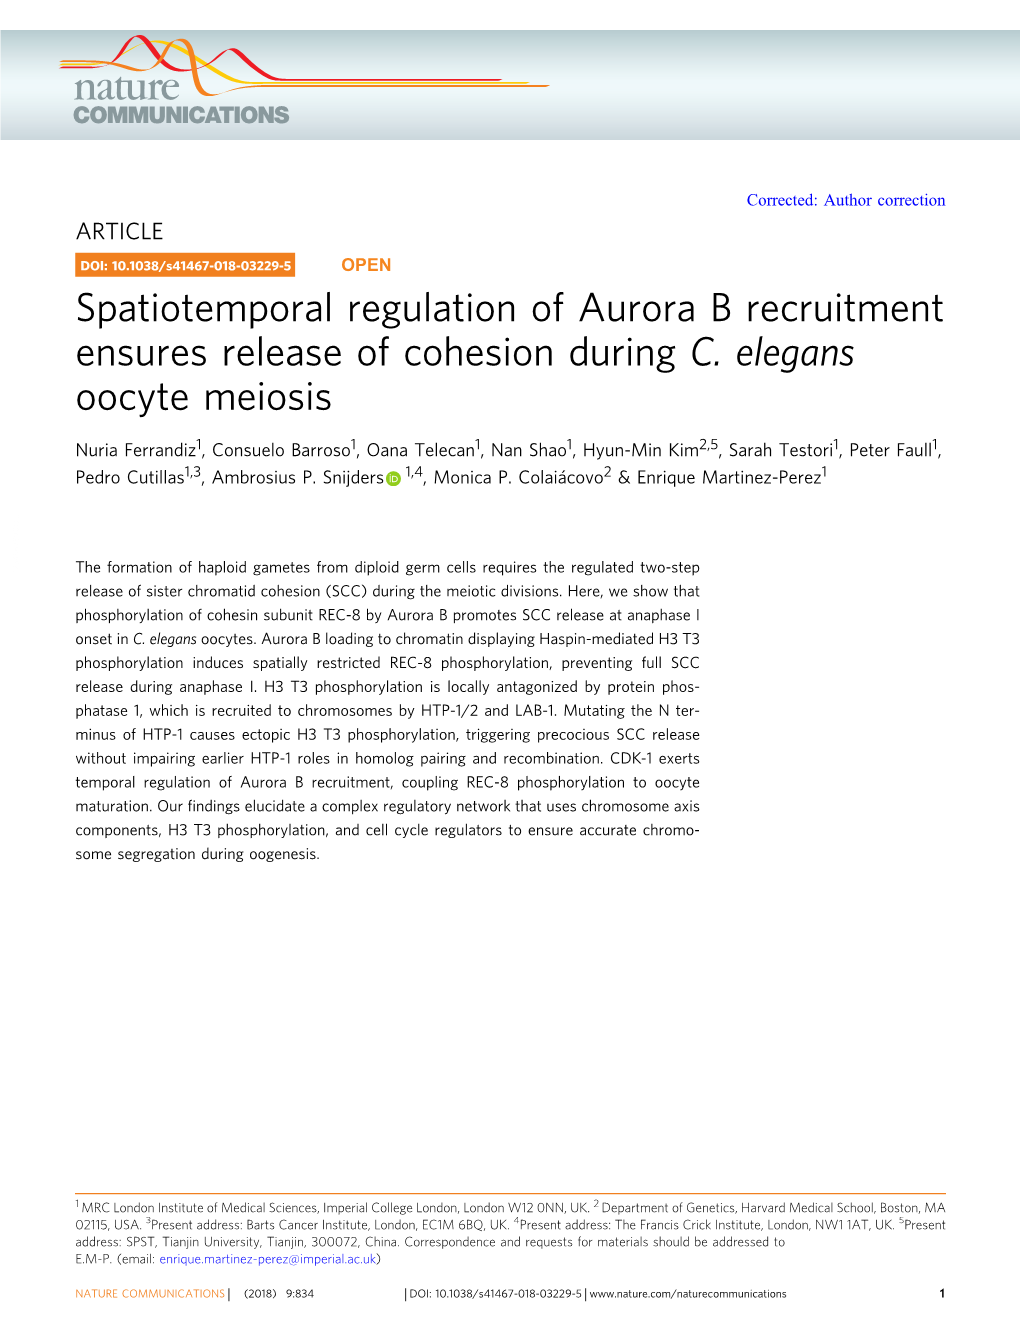 Spatiotemporal Regulation of Aurora B Recruitment Ensures Release of Cohesion During C